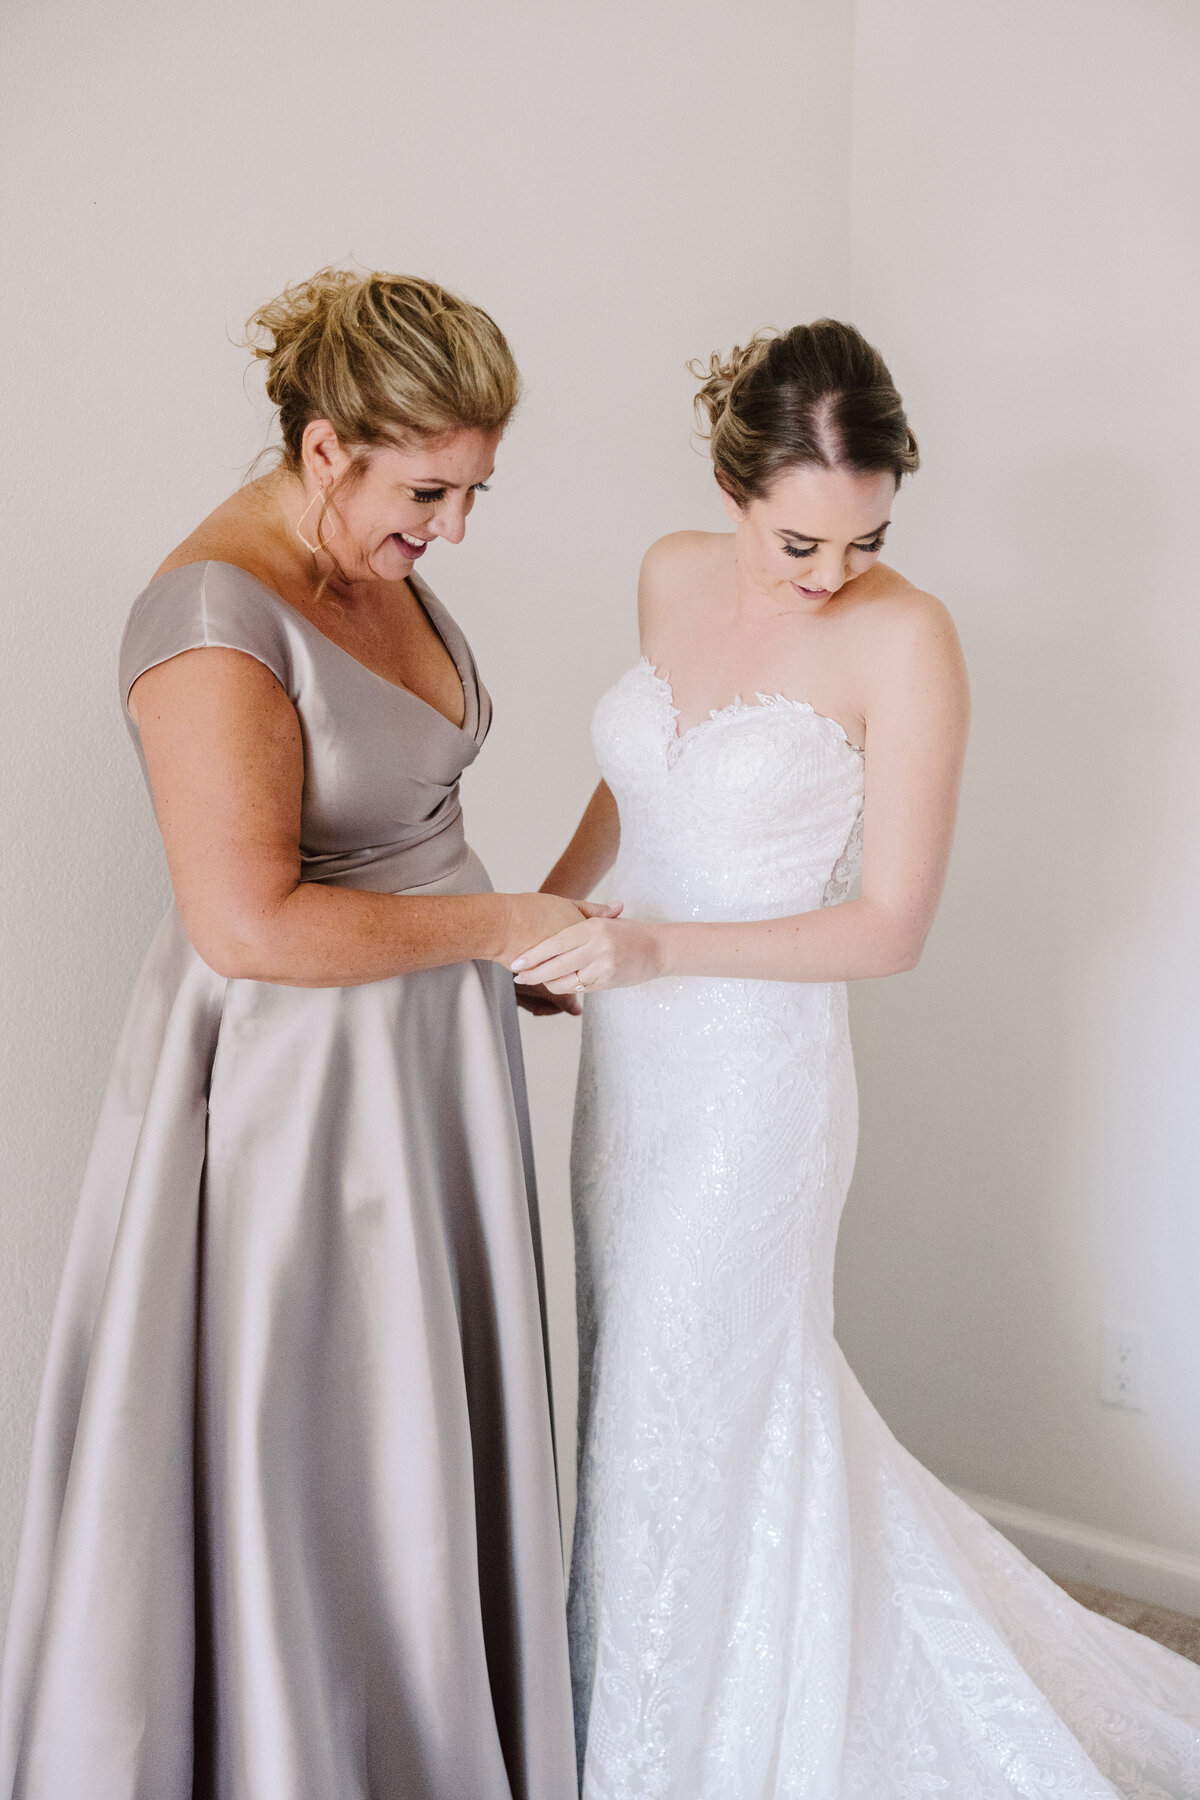 caitlin_audrey_photography (106 of 1157) - Copy